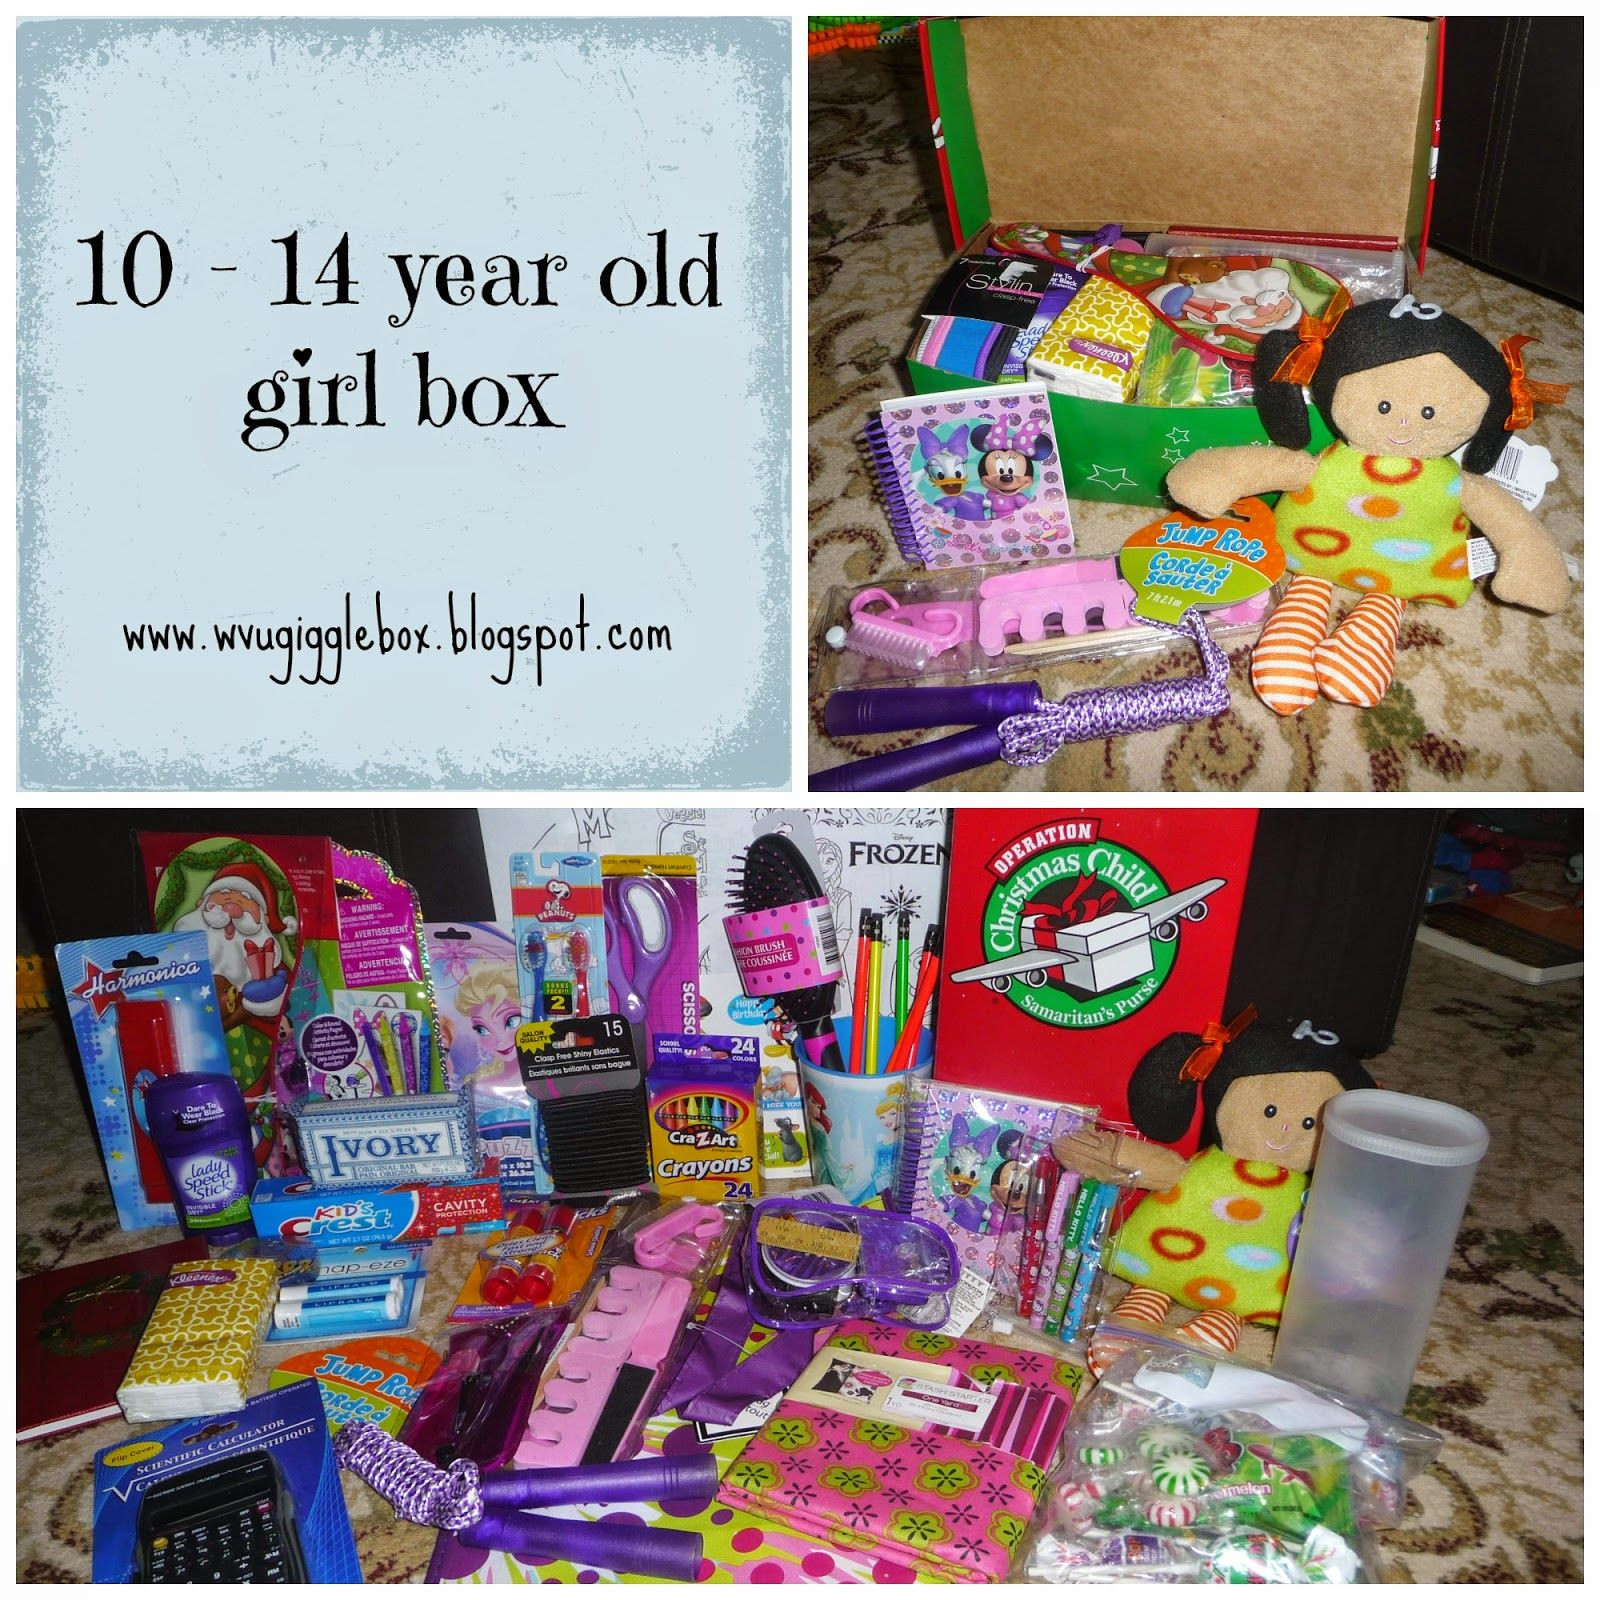 Operation Christmas Child Gift Ideas
 Operation Christmas Child 2014 packing a 10 14 year